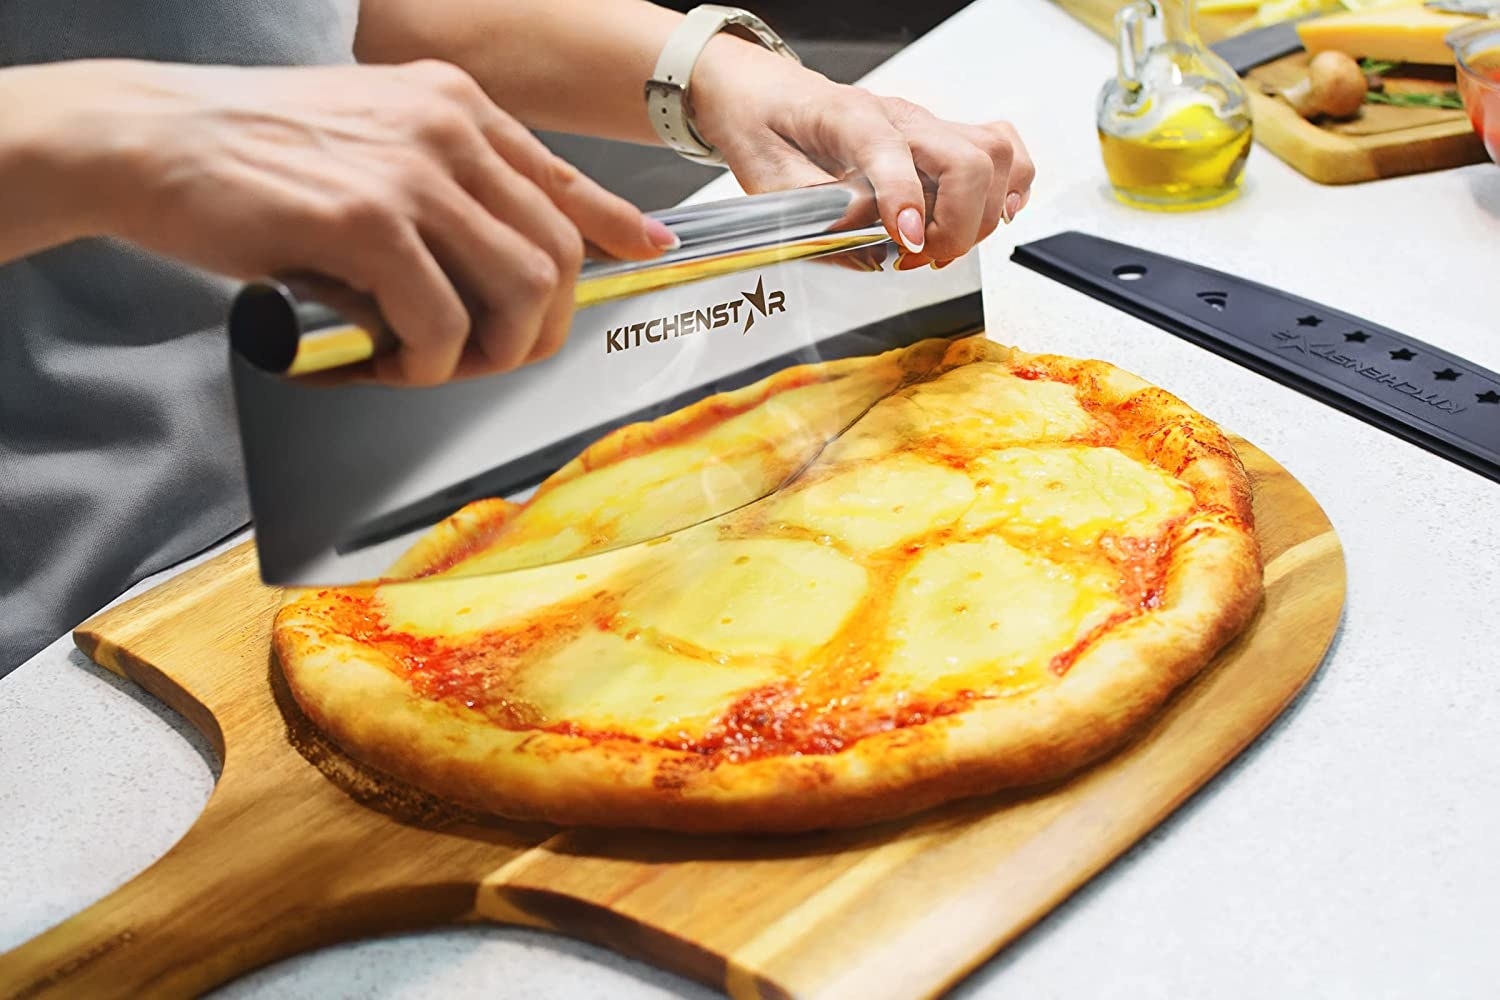 A person using the cutter to chop a pizza